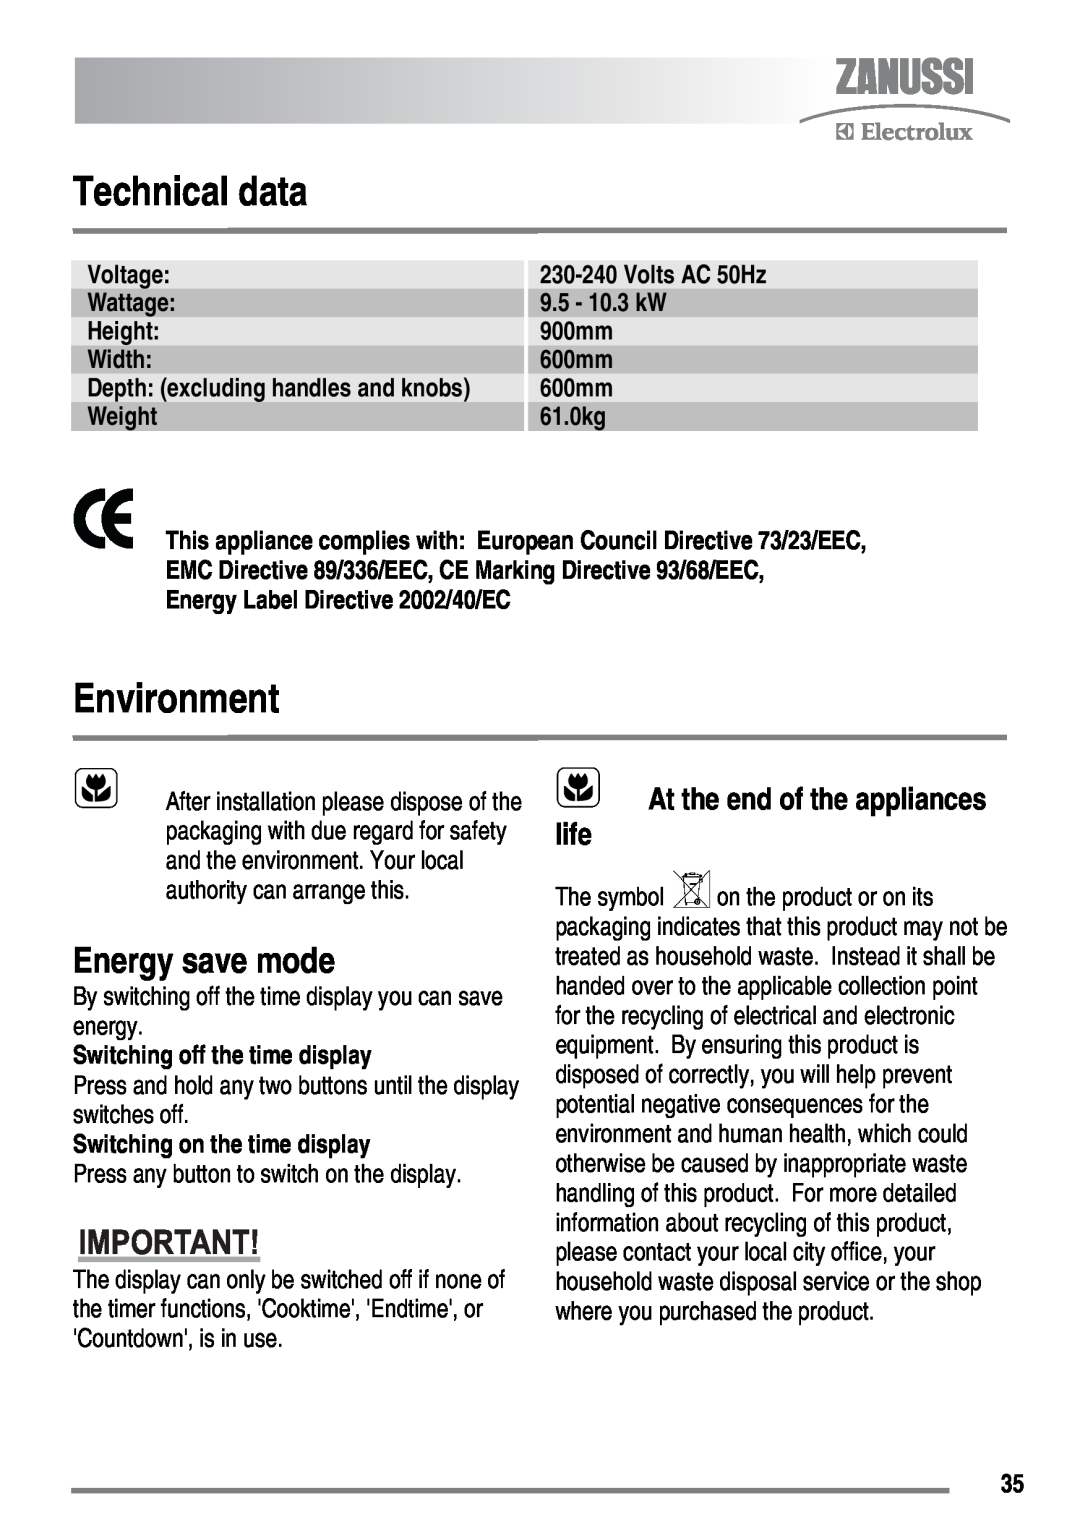 Zanussi ZKC6020 Technical data, Environment, Energy save mode, At the end of the appliances life, Voltage, Volts AC 50Hz 